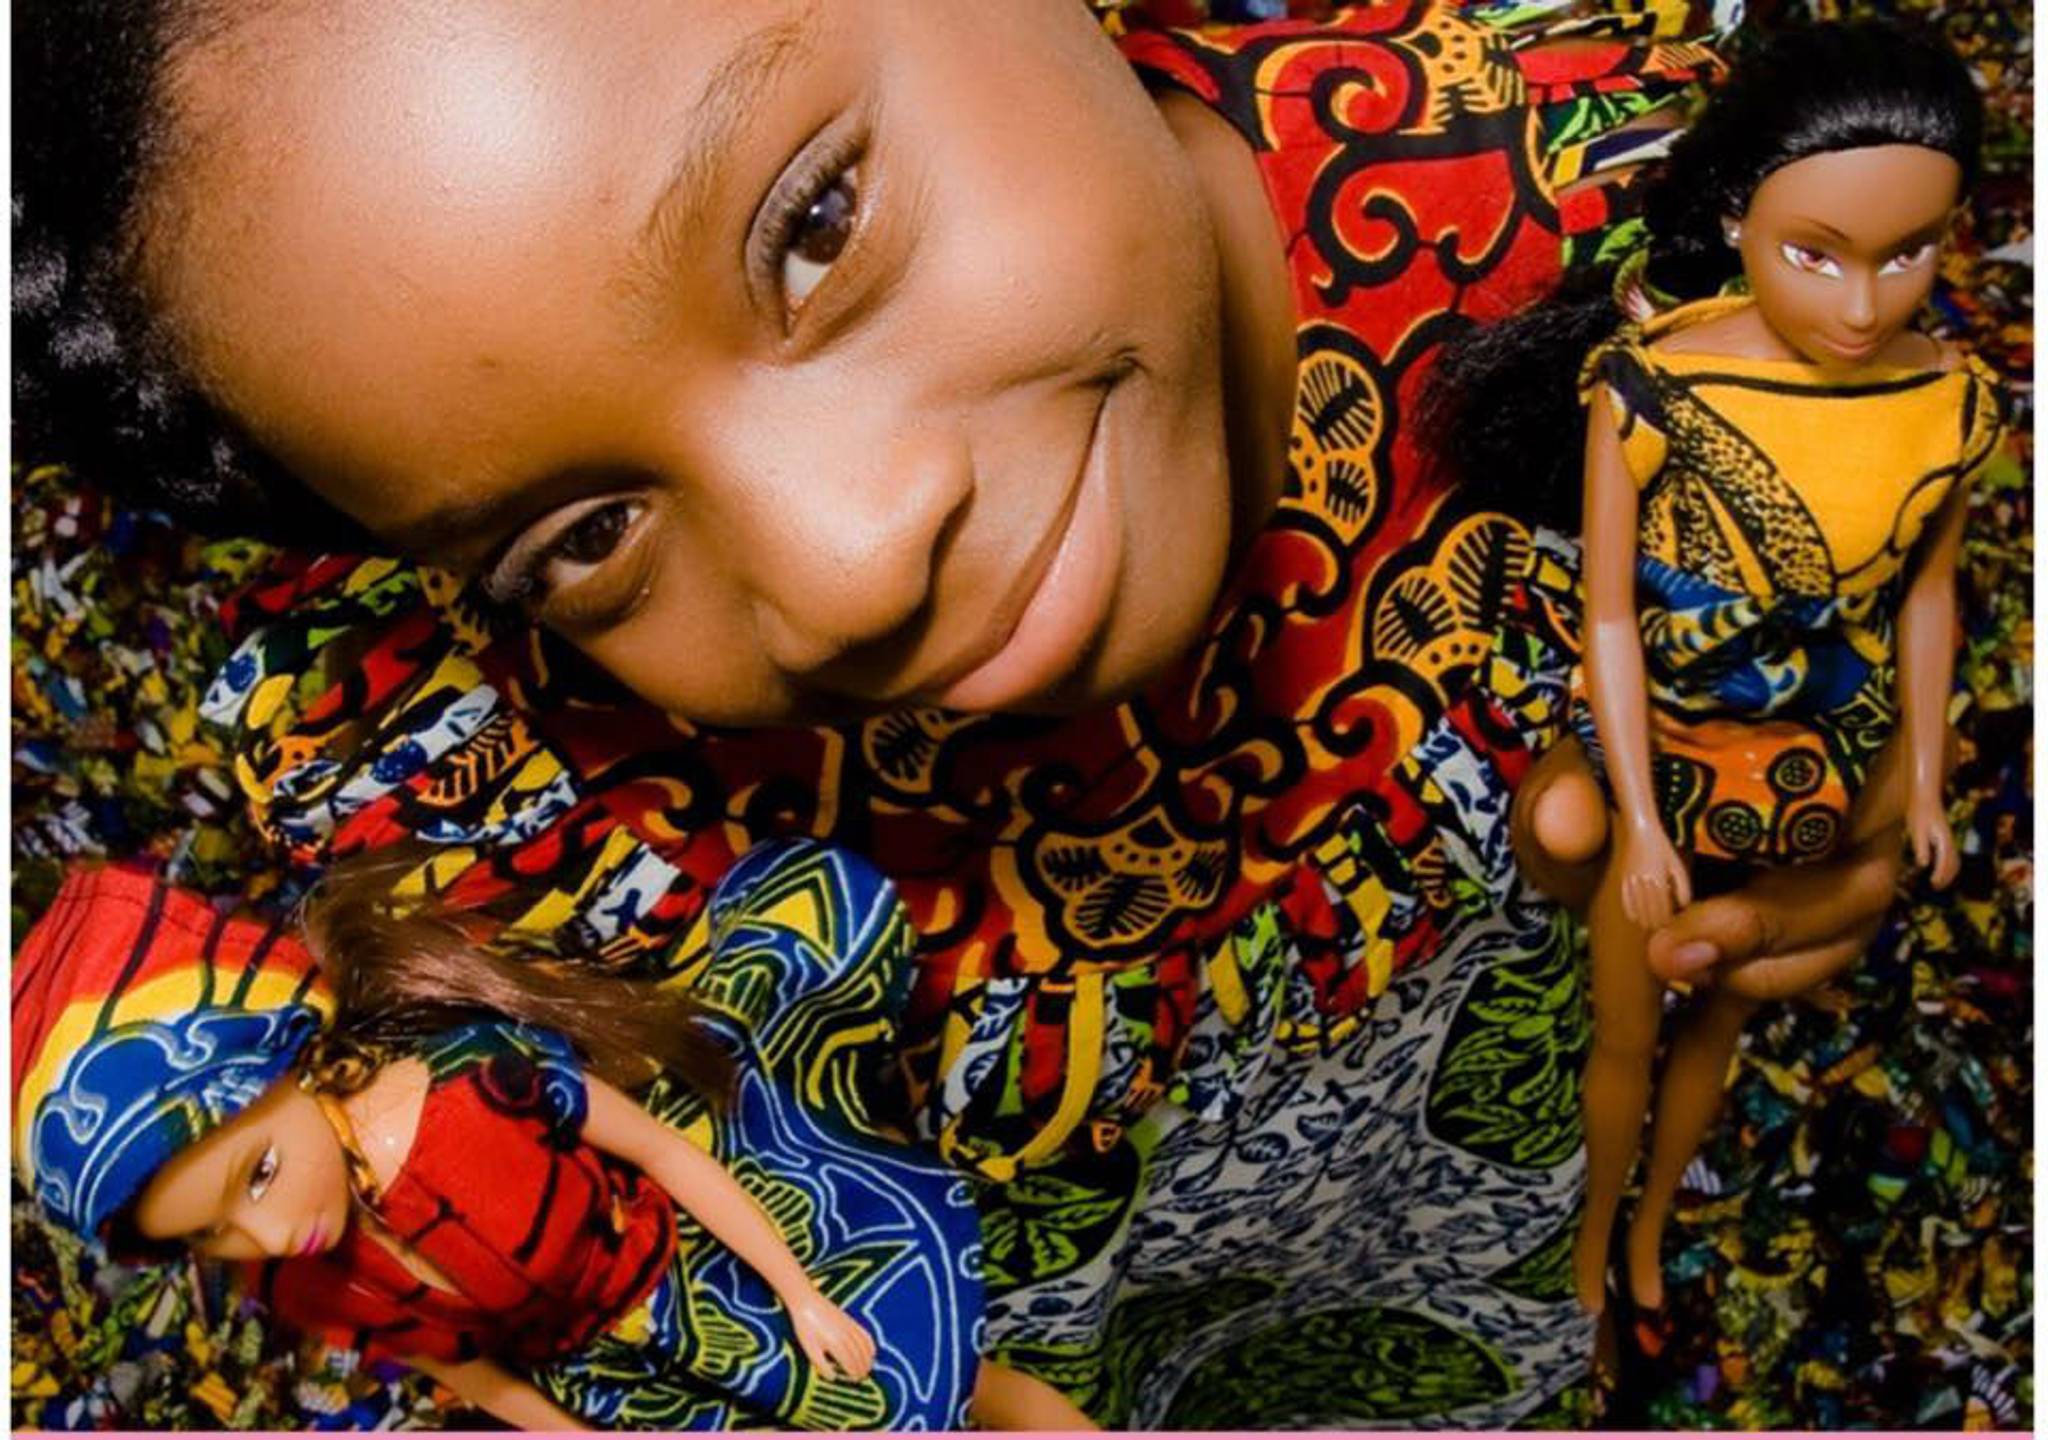 African dolls outselling Barbie in Nigeria